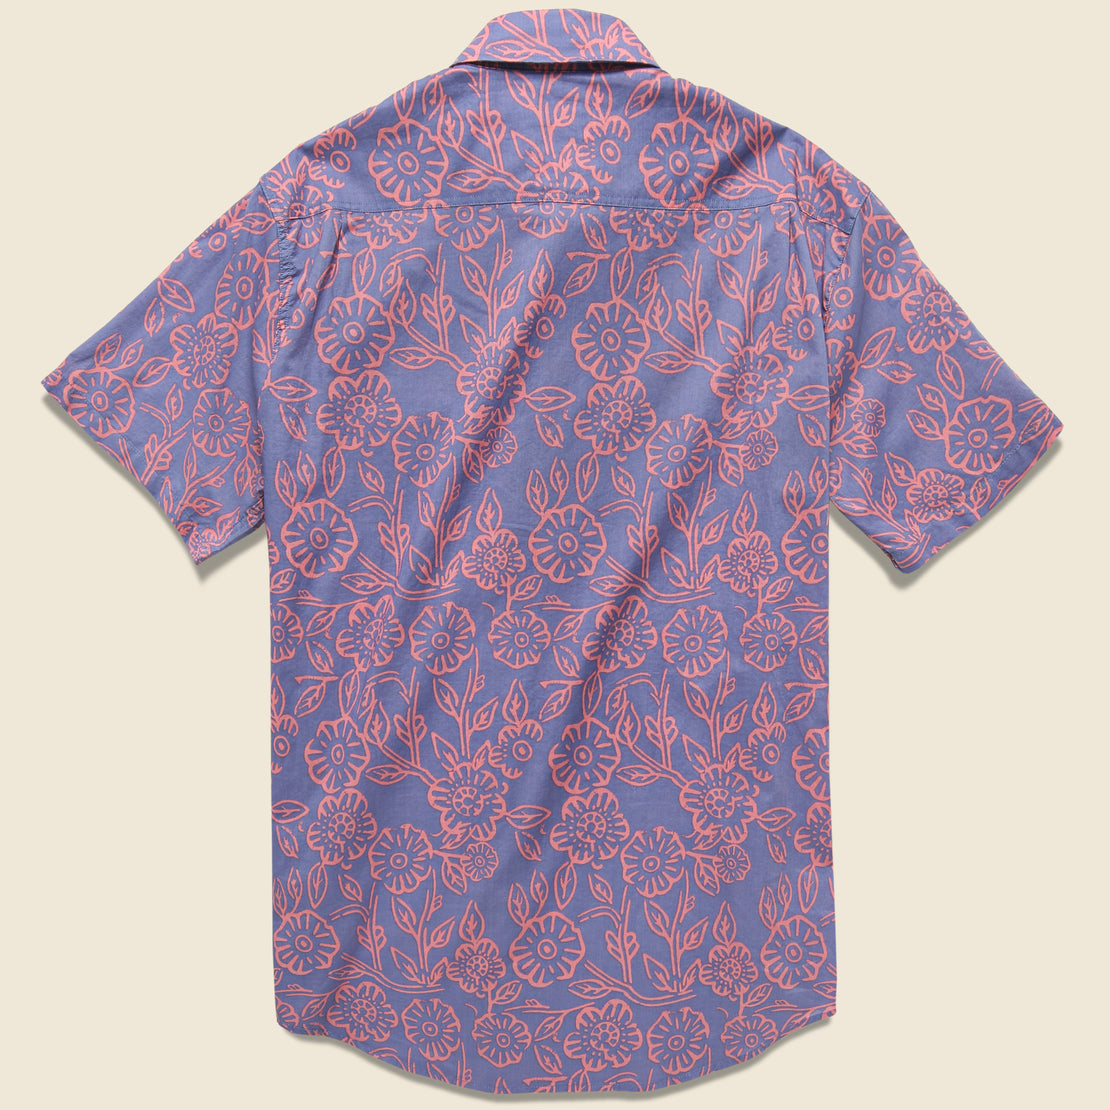 Reverse Print Coast Shirt - Pink Poppy - Faherty - STAG Provisions - Tops - S/S Woven - Floral